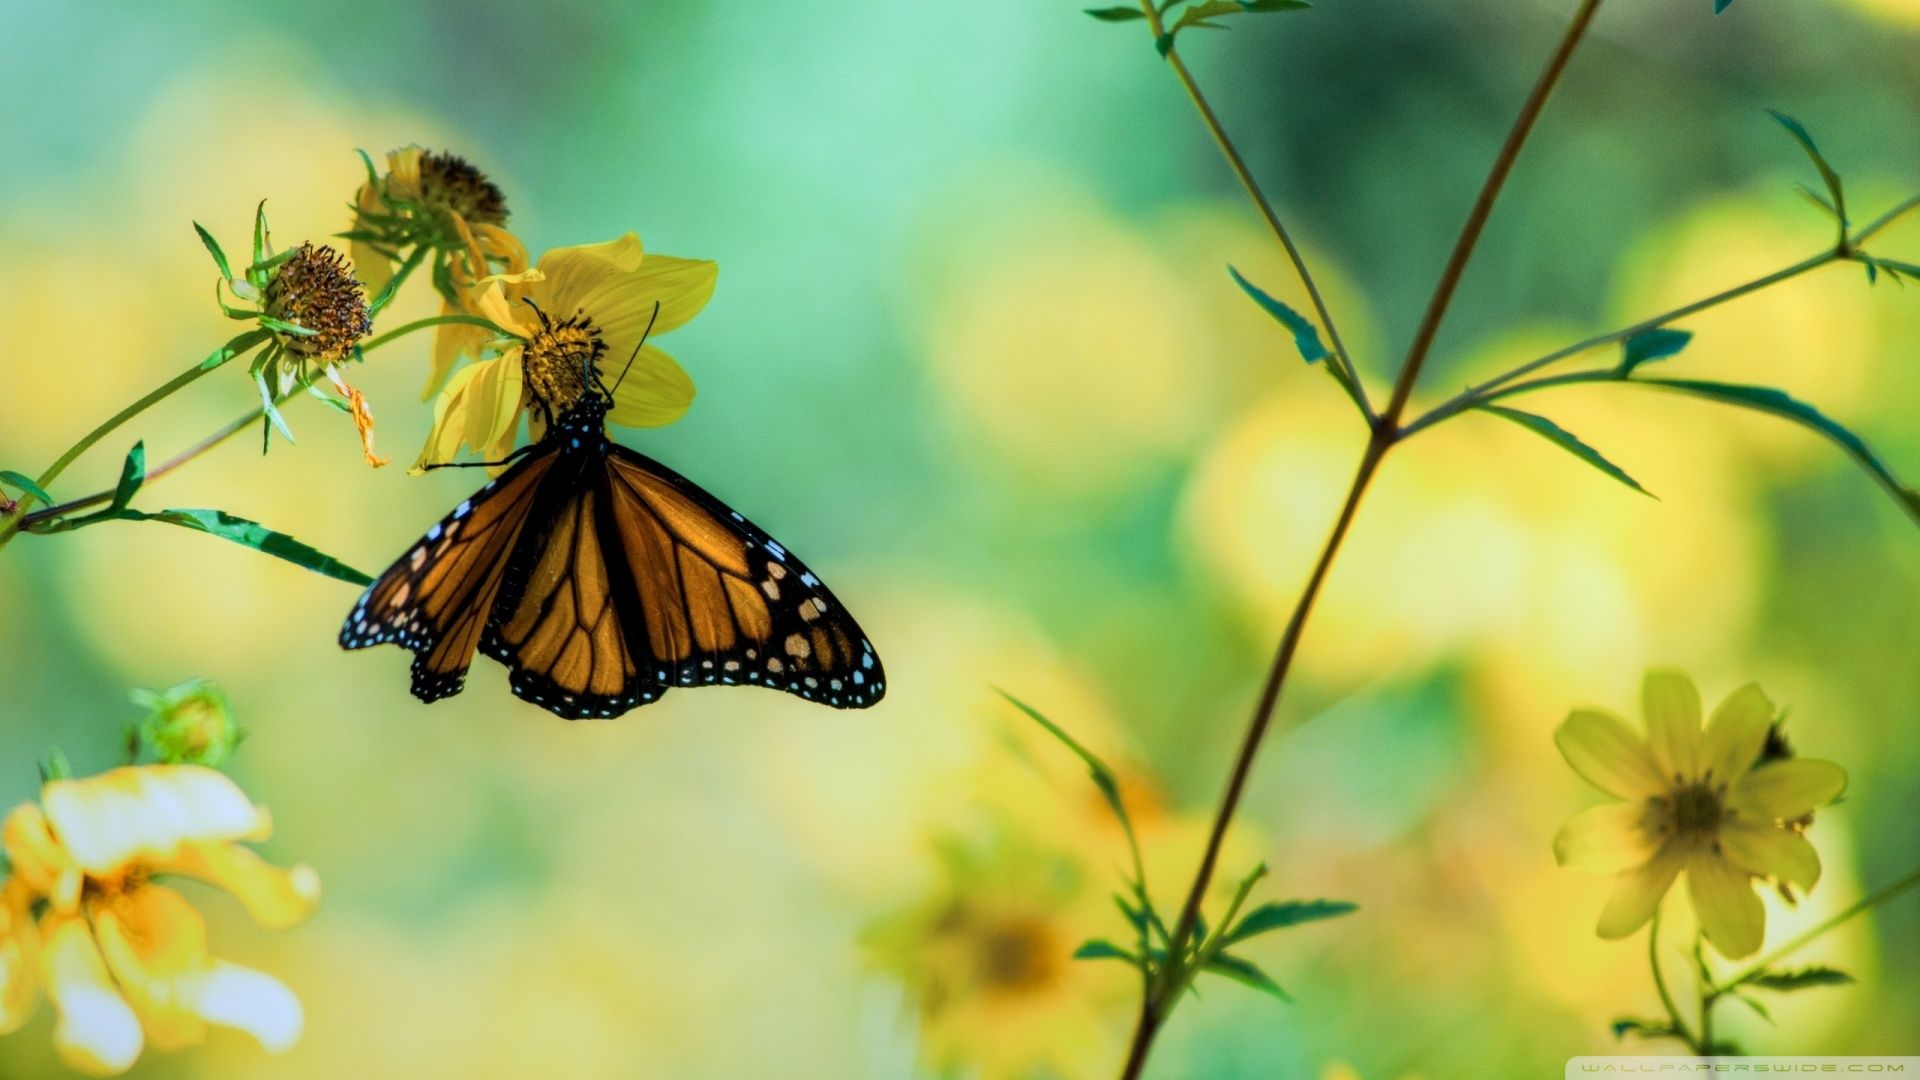 COLORFUL BUTTERFLY WALLPAPERS FREE TO DOWNLOAD